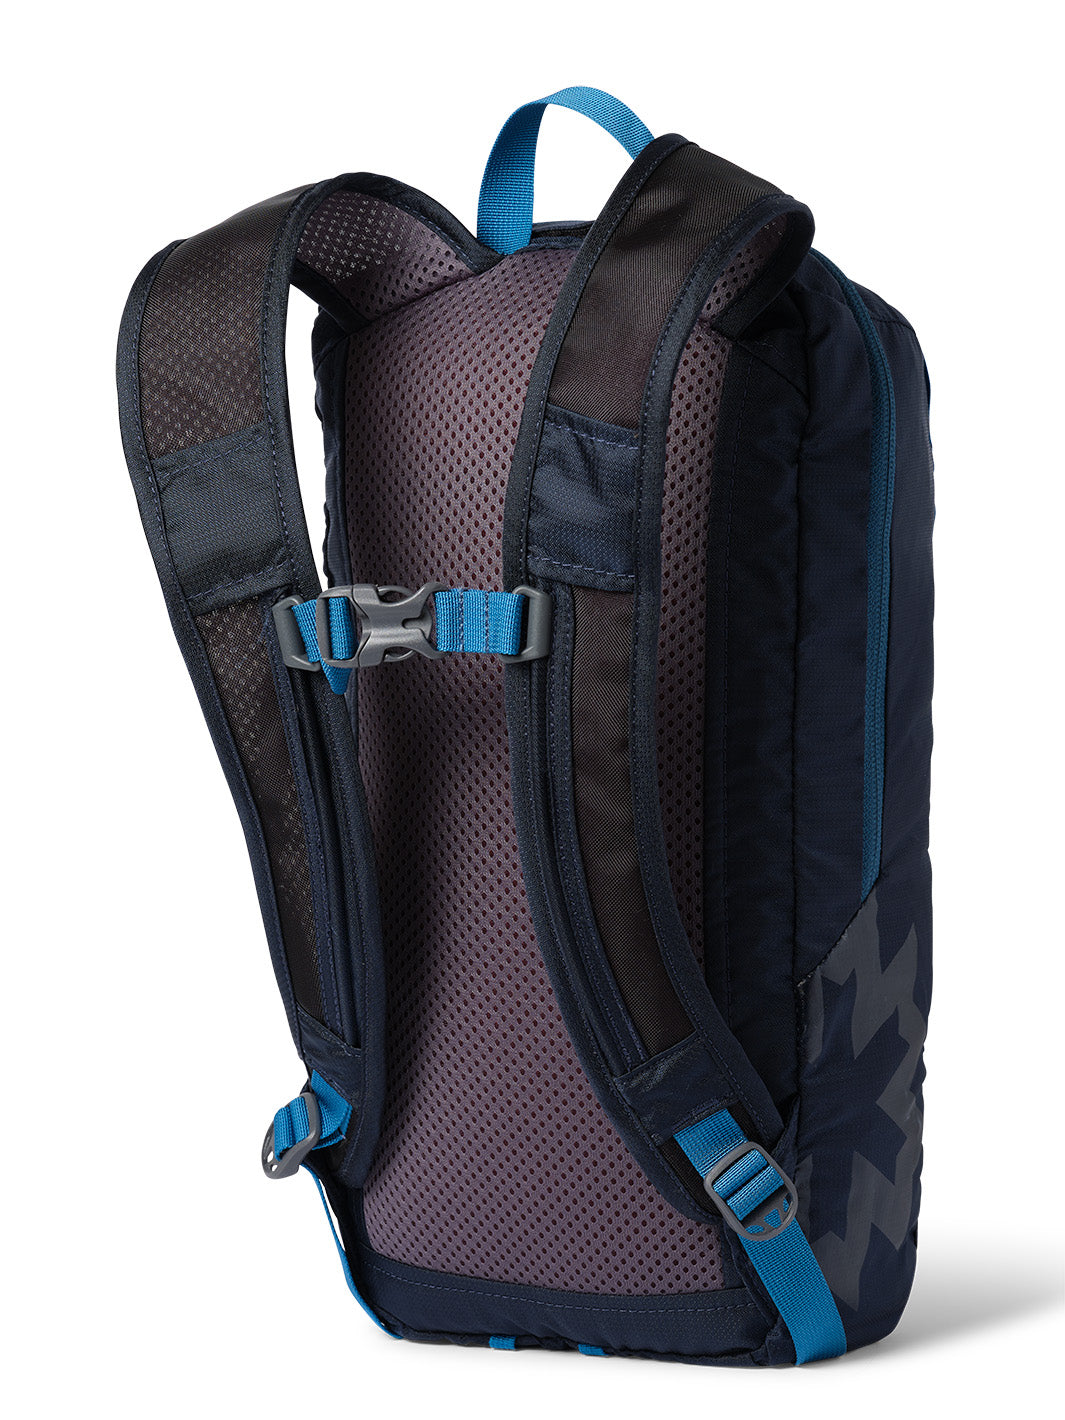 Remote Z Backpack in Black & Blue. Promotional Products for your business and events.